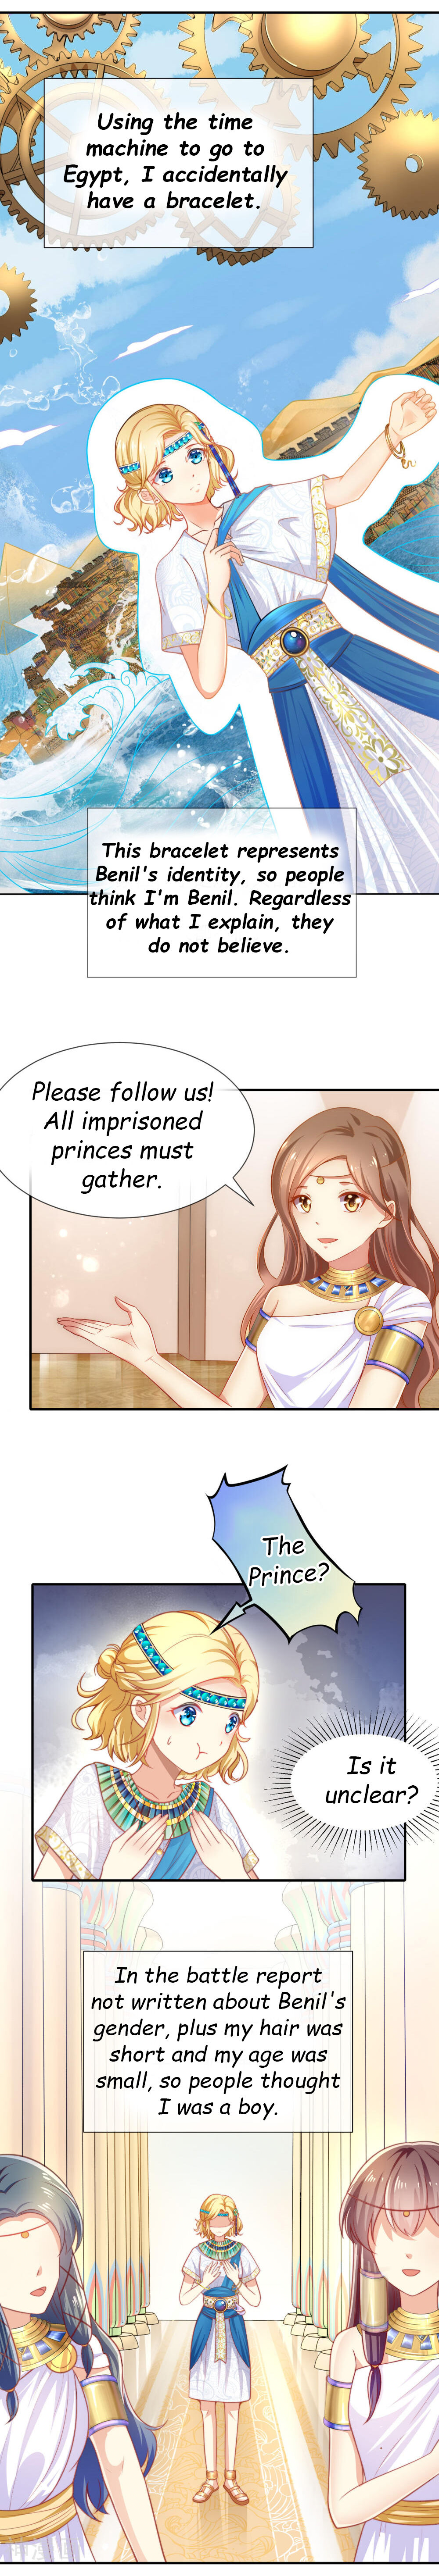 Pharaoh's First Favorite Queen - Page 3